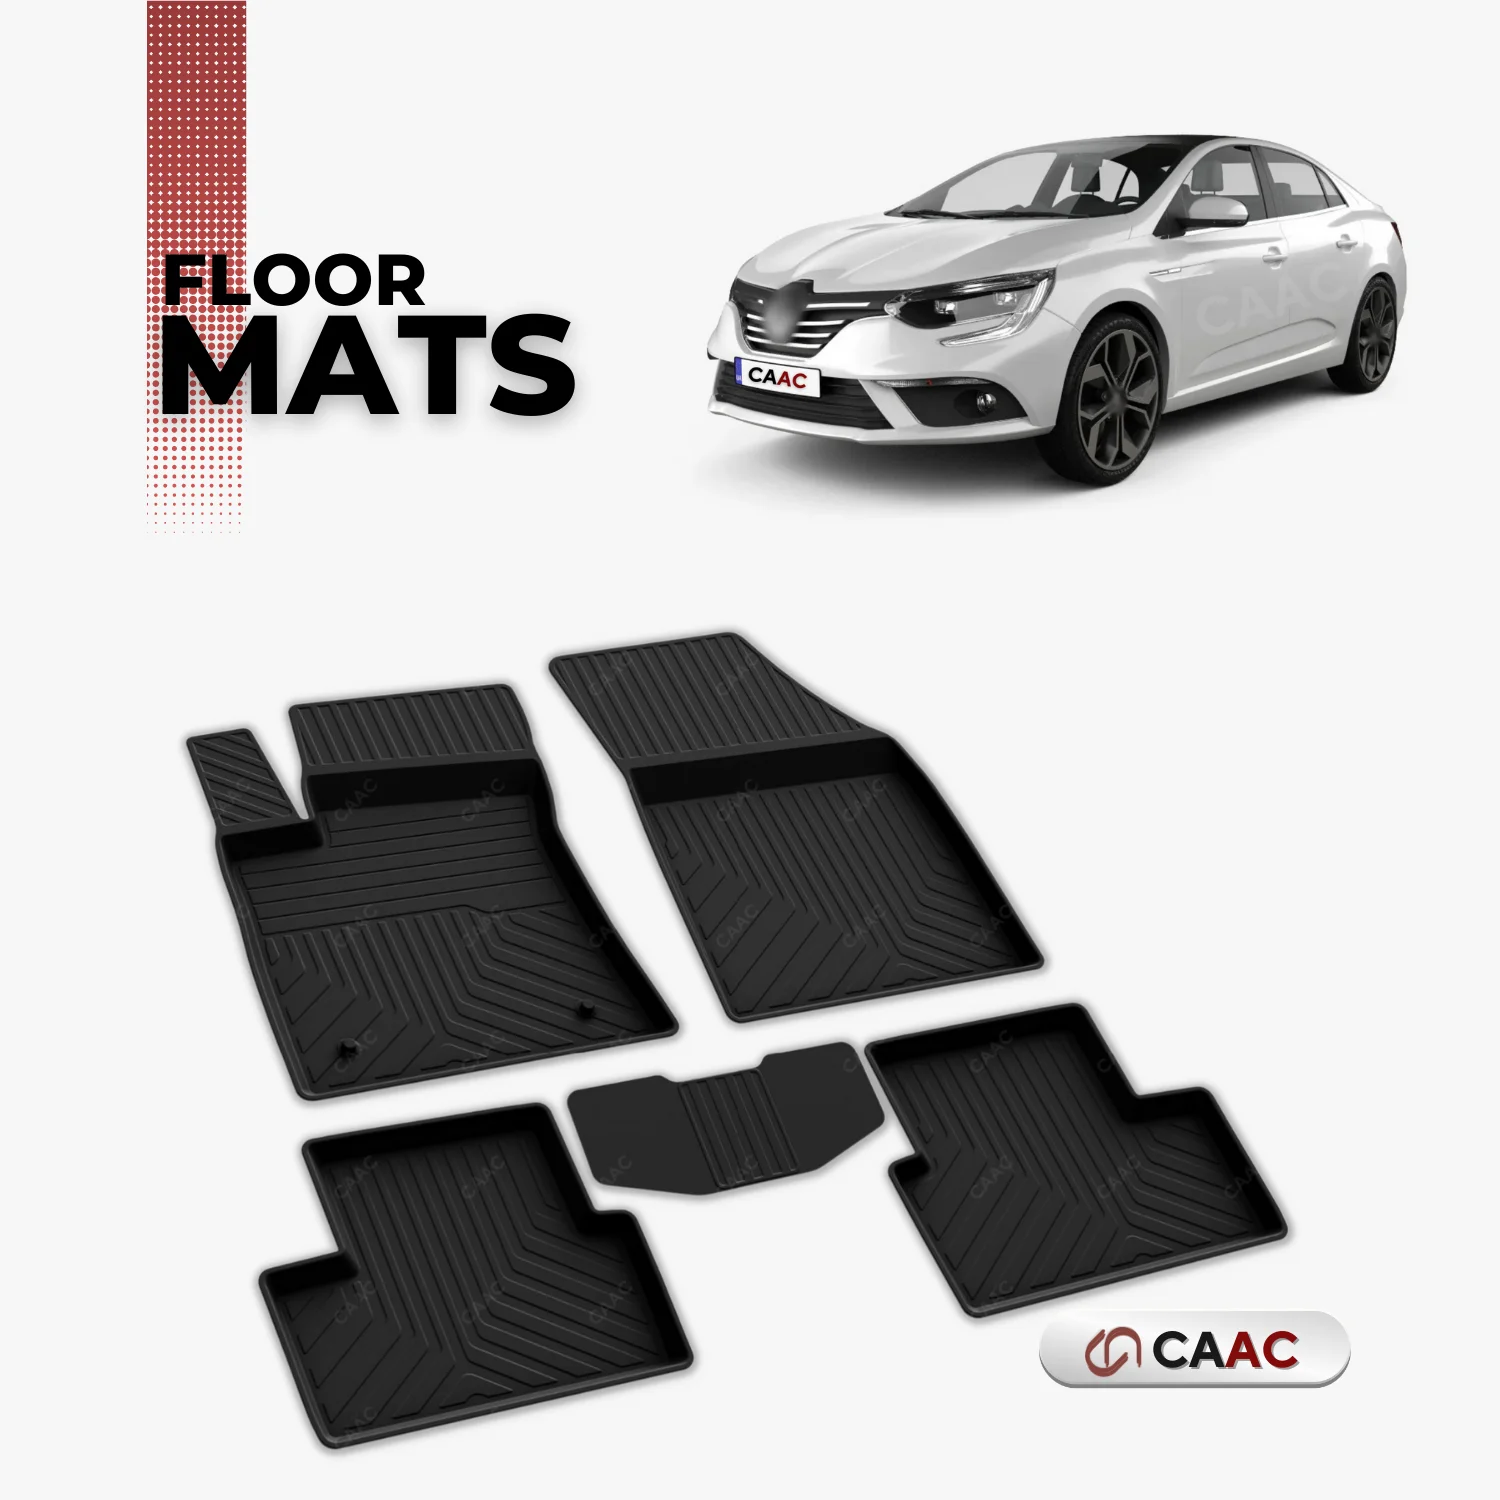 

For Renault Megane HB SD 2016-2023 Floor Mats Lining All Air Molded 4D Black 5 Piece High Quality Washable Accessory Ornament